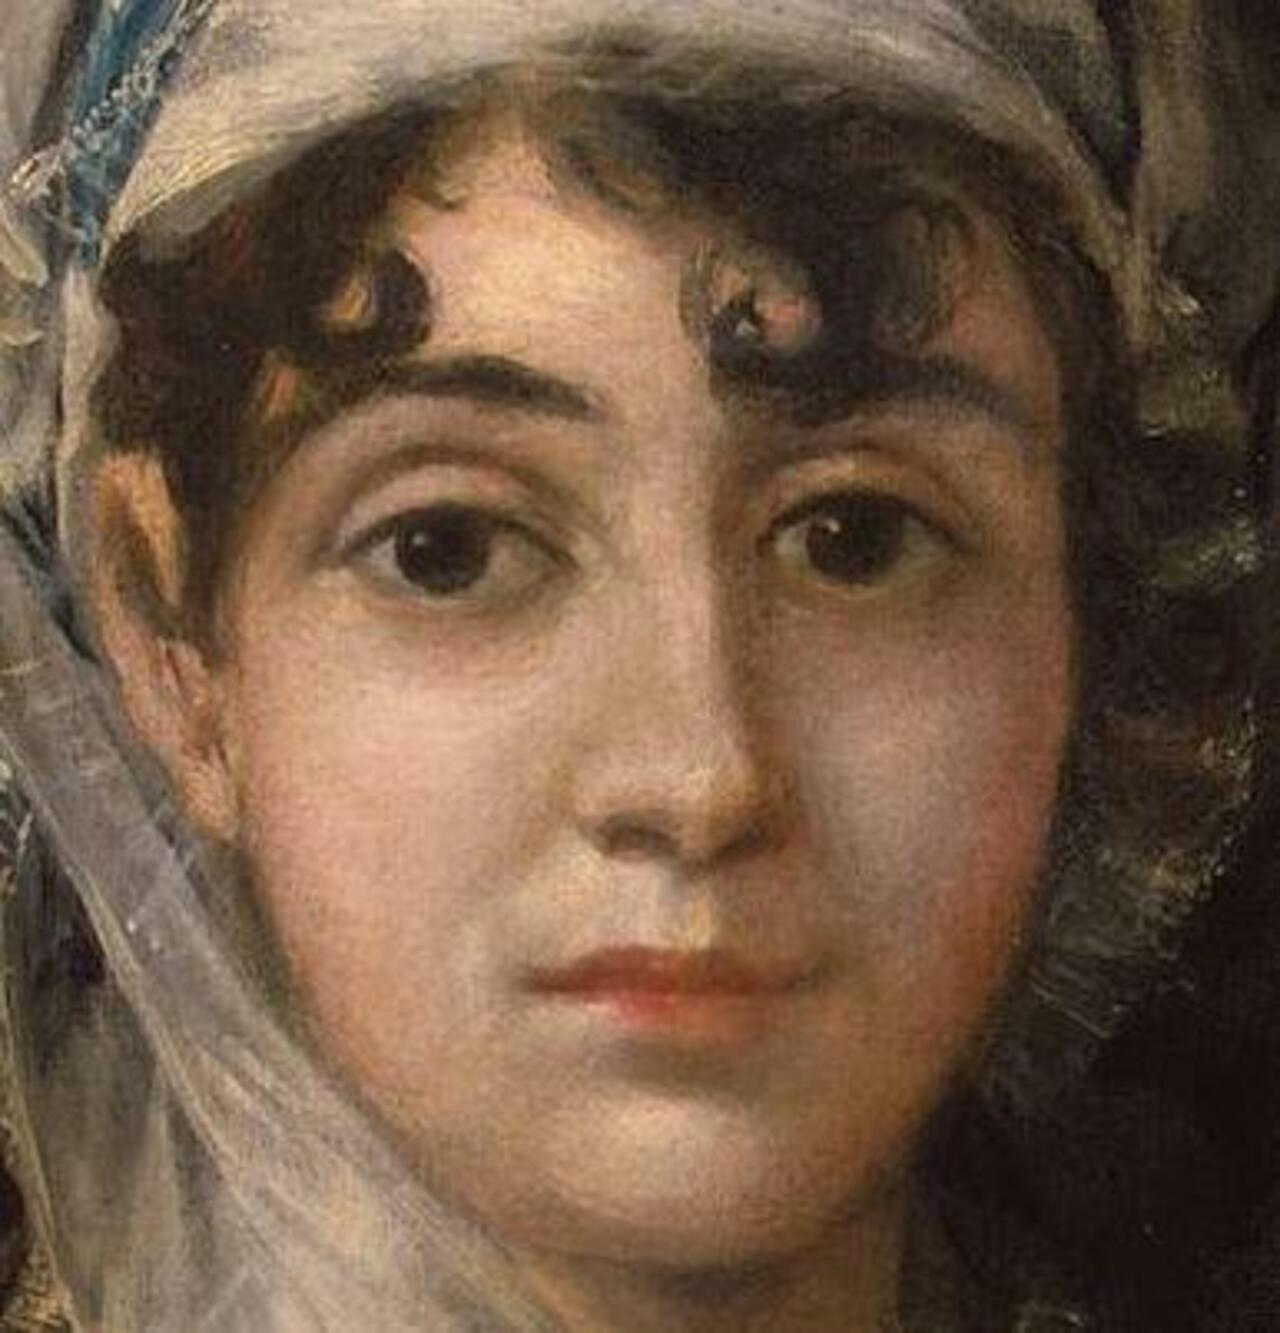 Francisco Goya (  30 March 1746 Fuendetodos, Arago'n, Spain - died 1828  France) 
Portrait of Antonia Zárate(detail) http://t.co/th4P3OOBl1